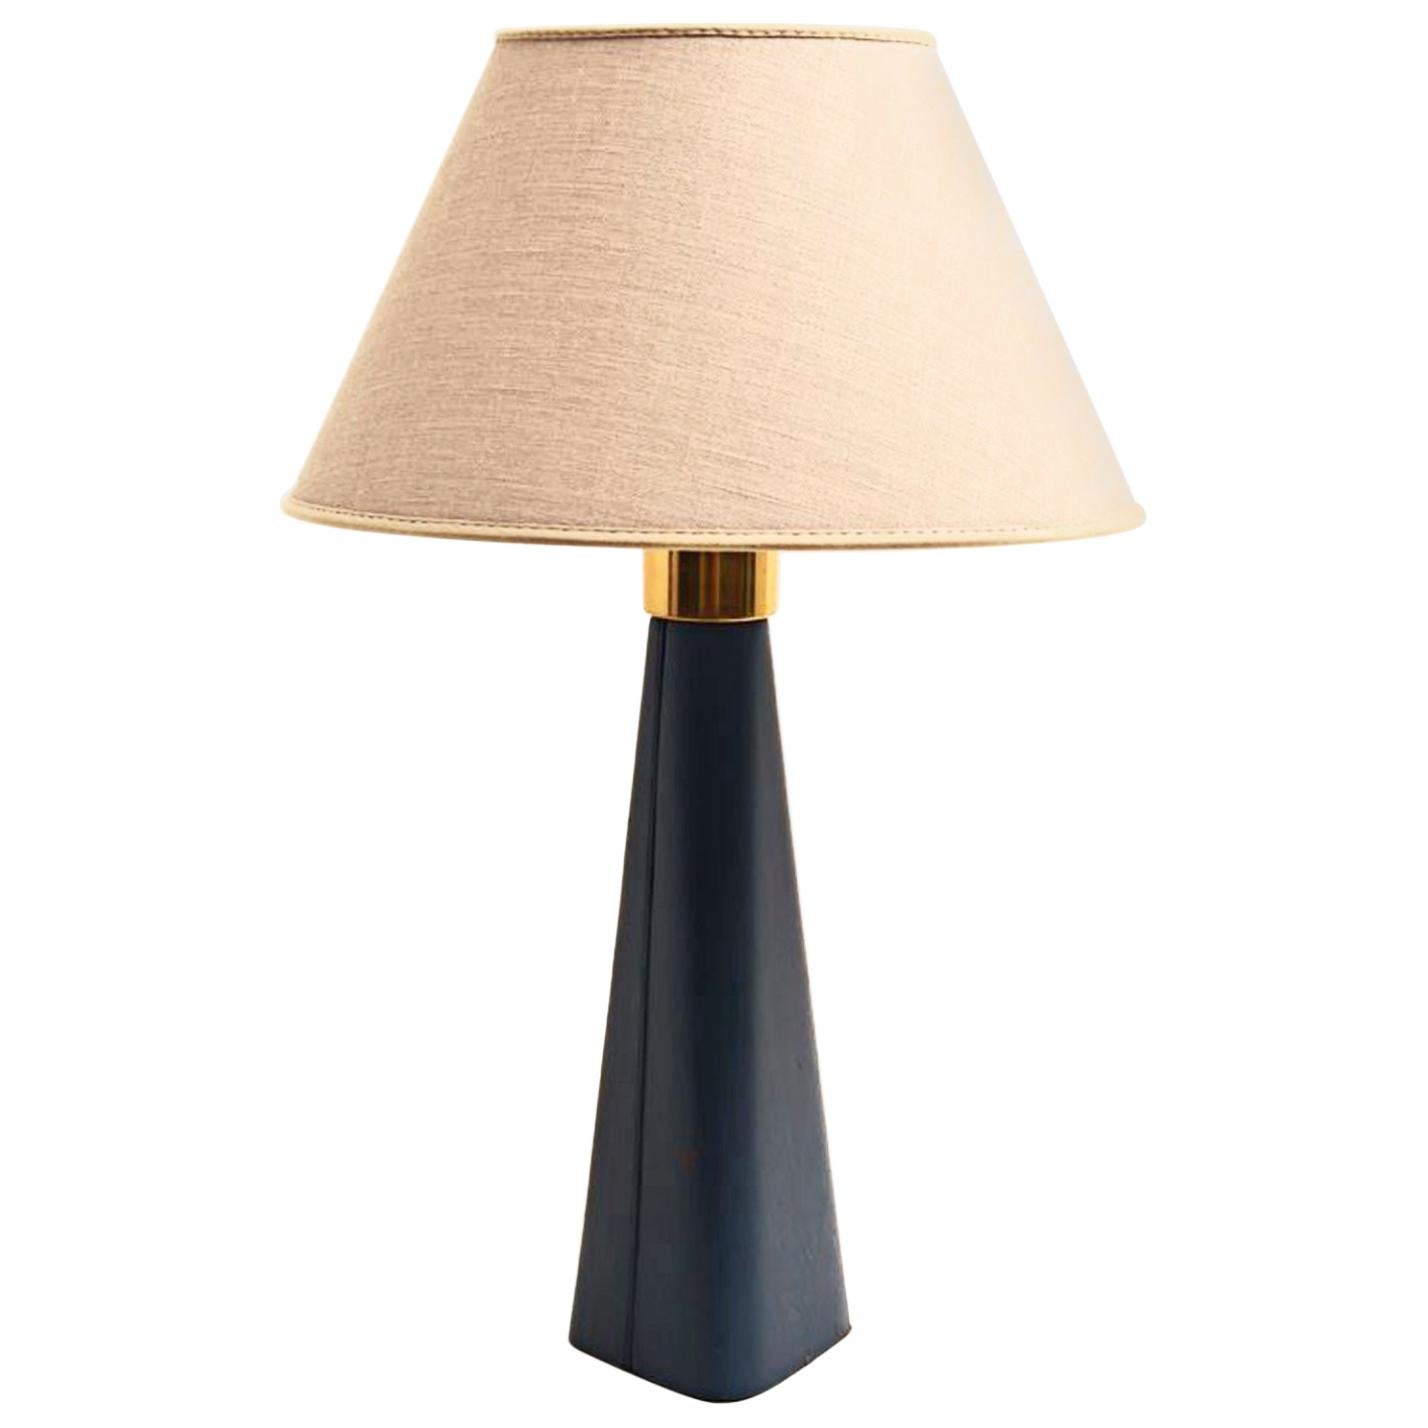 Lisa Johansson-Pape Table Lamp Manufactured by Orno, Finland, 1950 For Sale